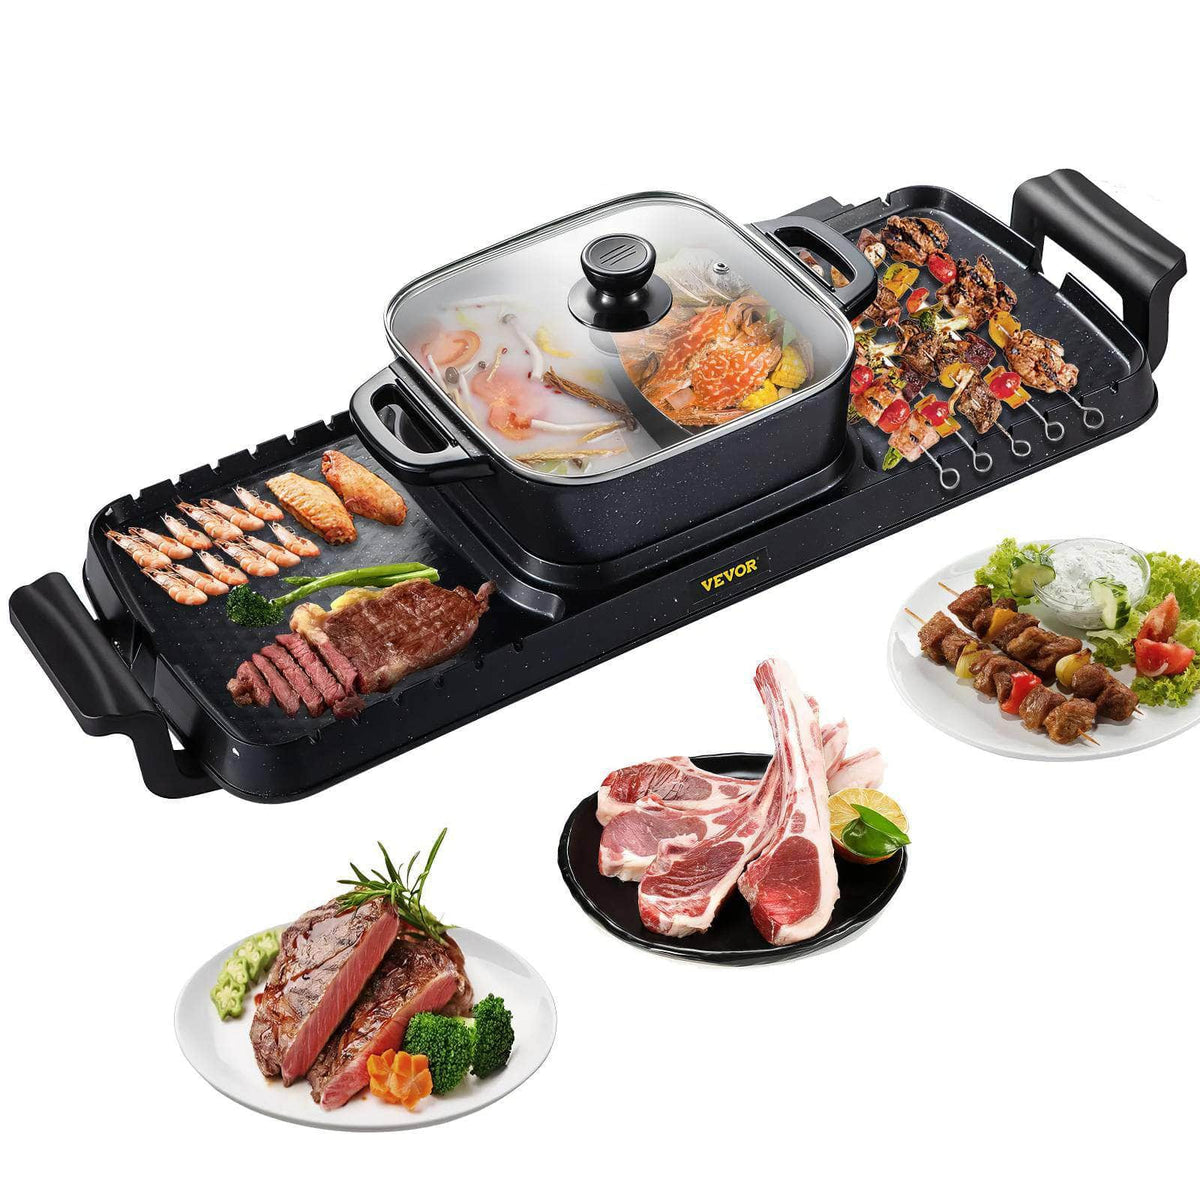 VEVOR 2in1 Electric BBQ Pan Grill Hot Pot - 2400W Multifunction, Portable Smokeless Nonstick, Detachable Barbecue Plate for Home United States